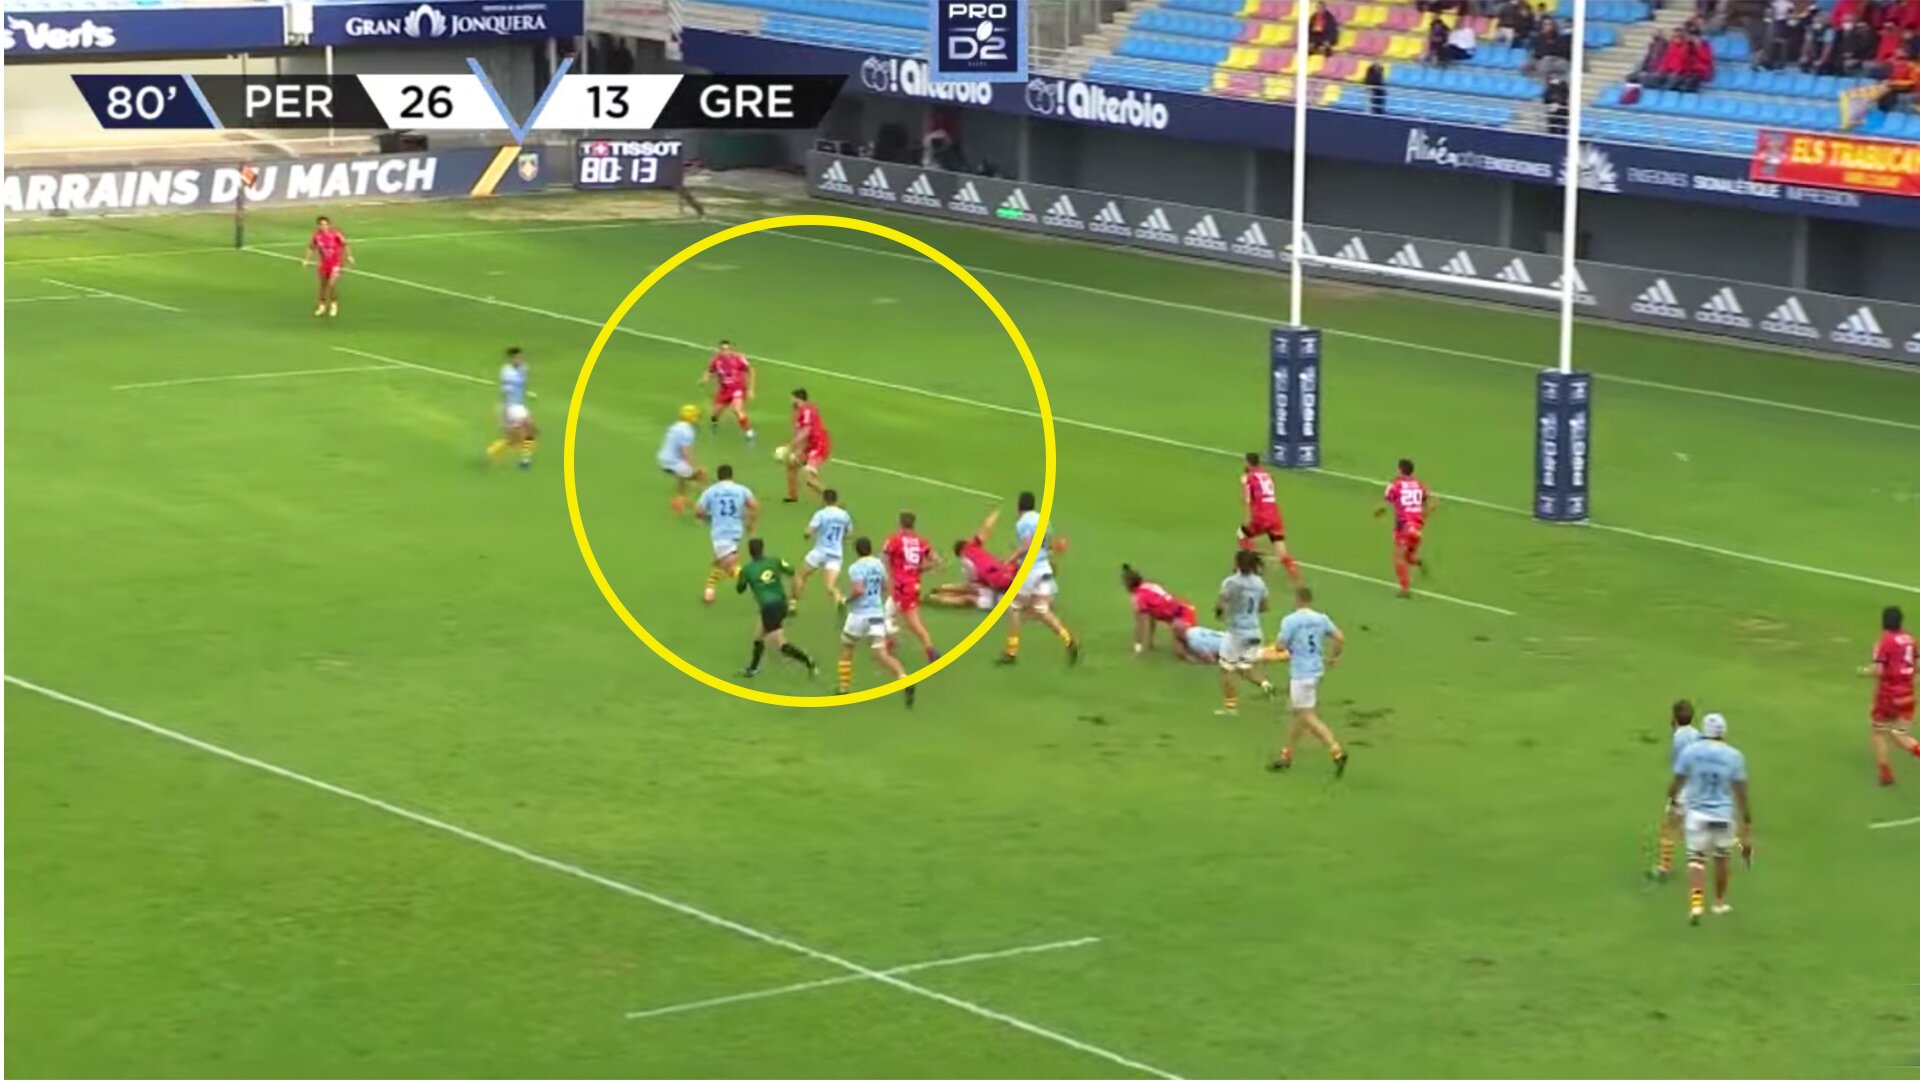 The Pro D2 division has just witnessed the most French rugby score of all time